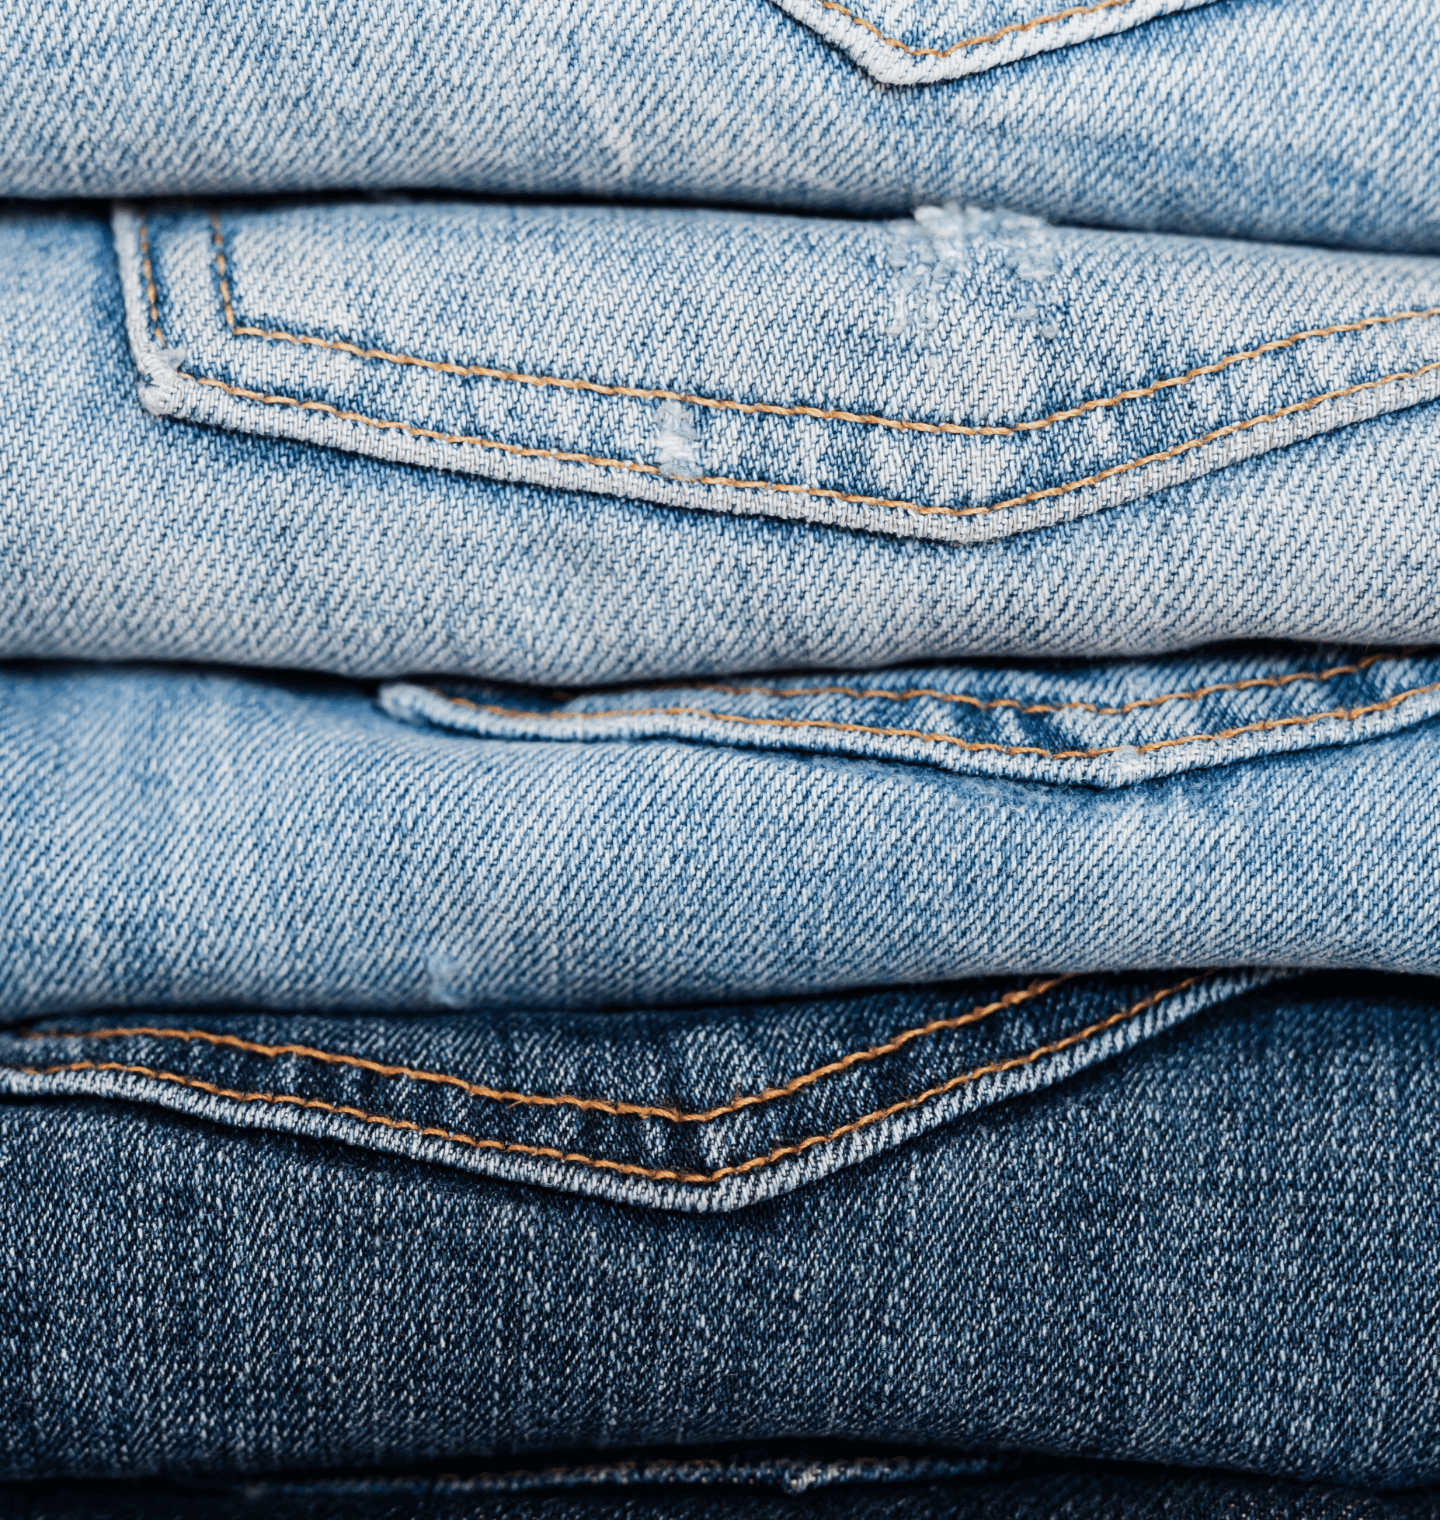 Turn basic jeans into eye-catching distressed jeans.